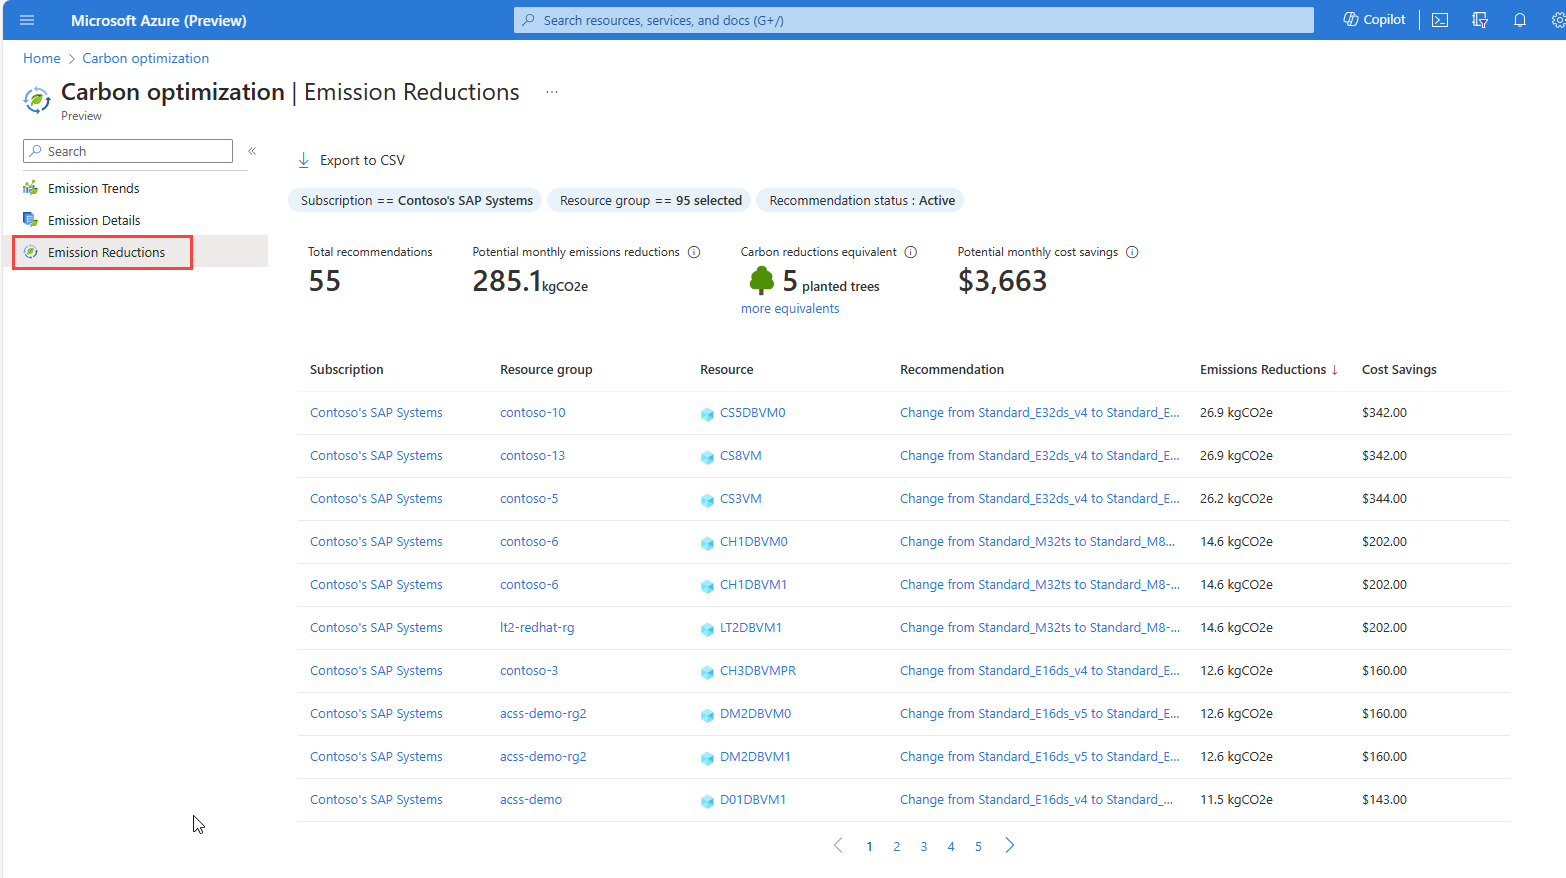 A screenshot showing the emissions reduction page.